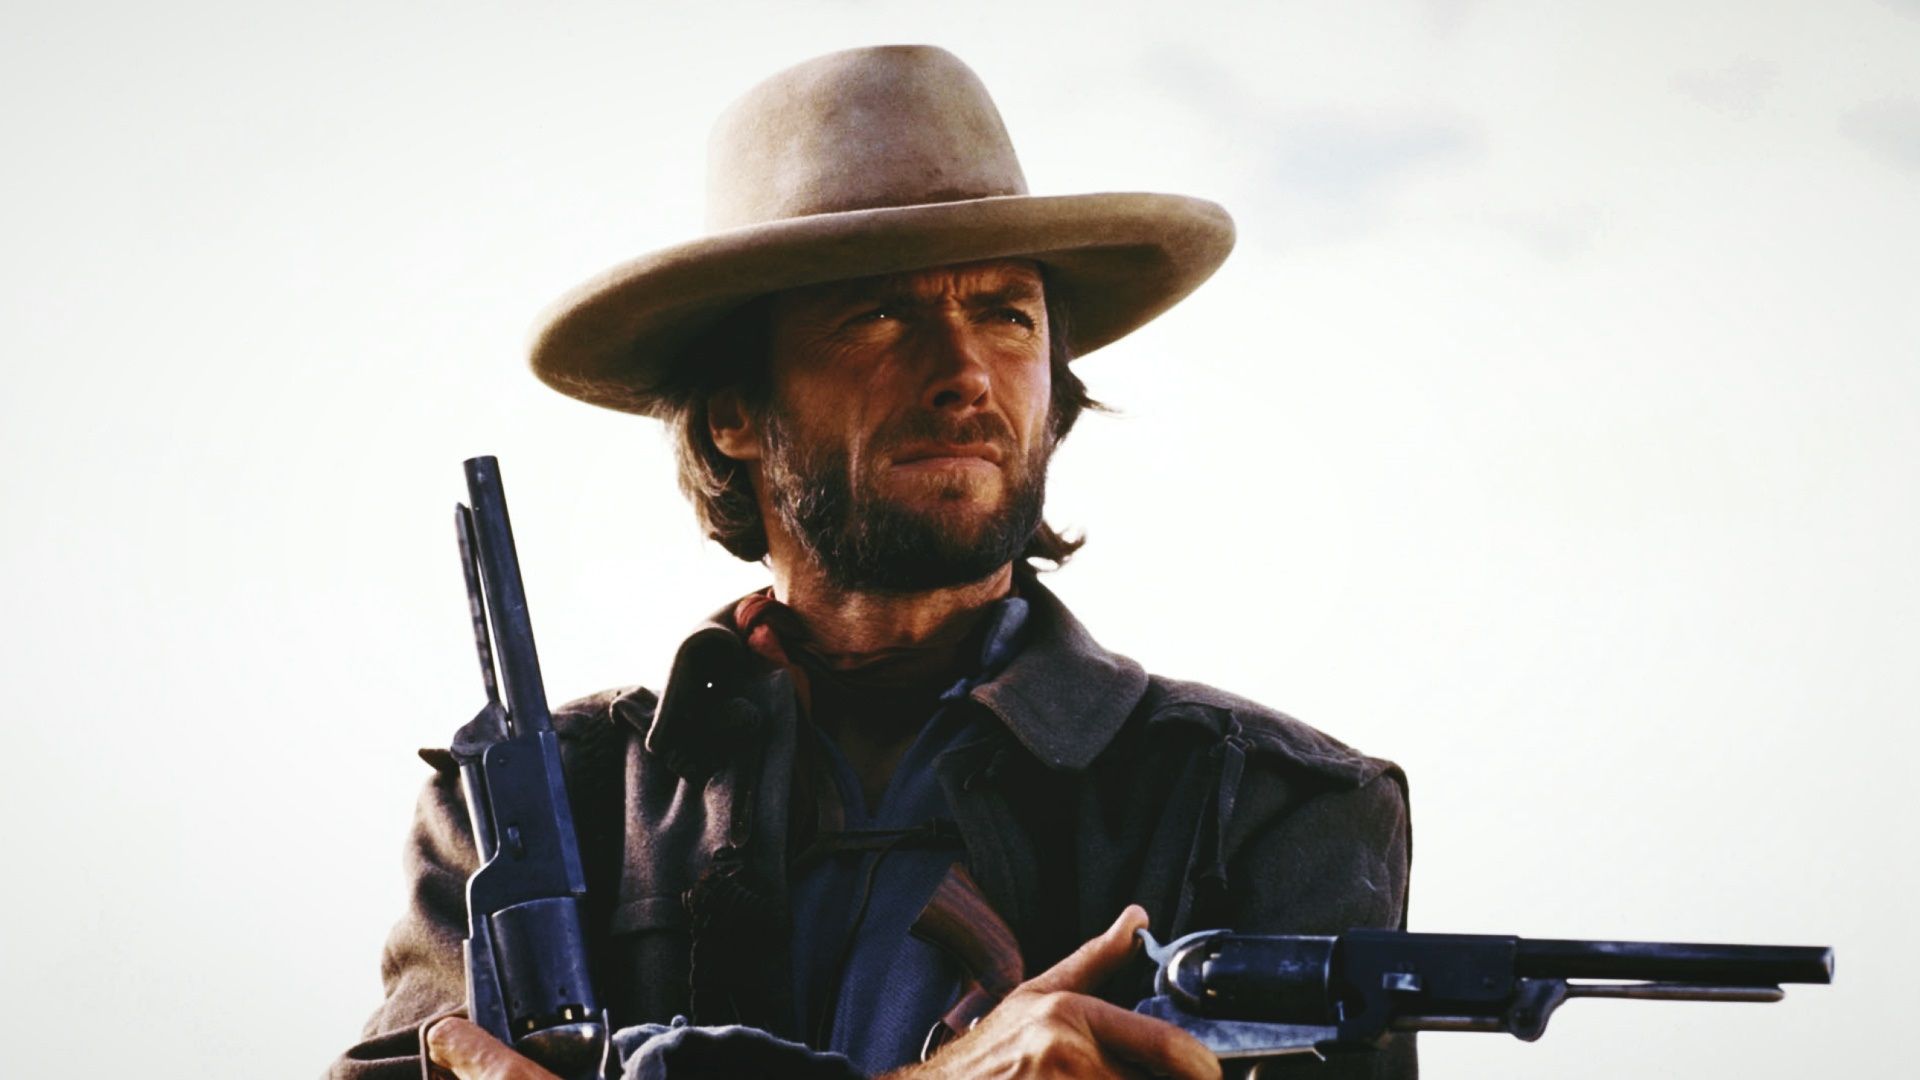 The Outlaw Josey Wales background